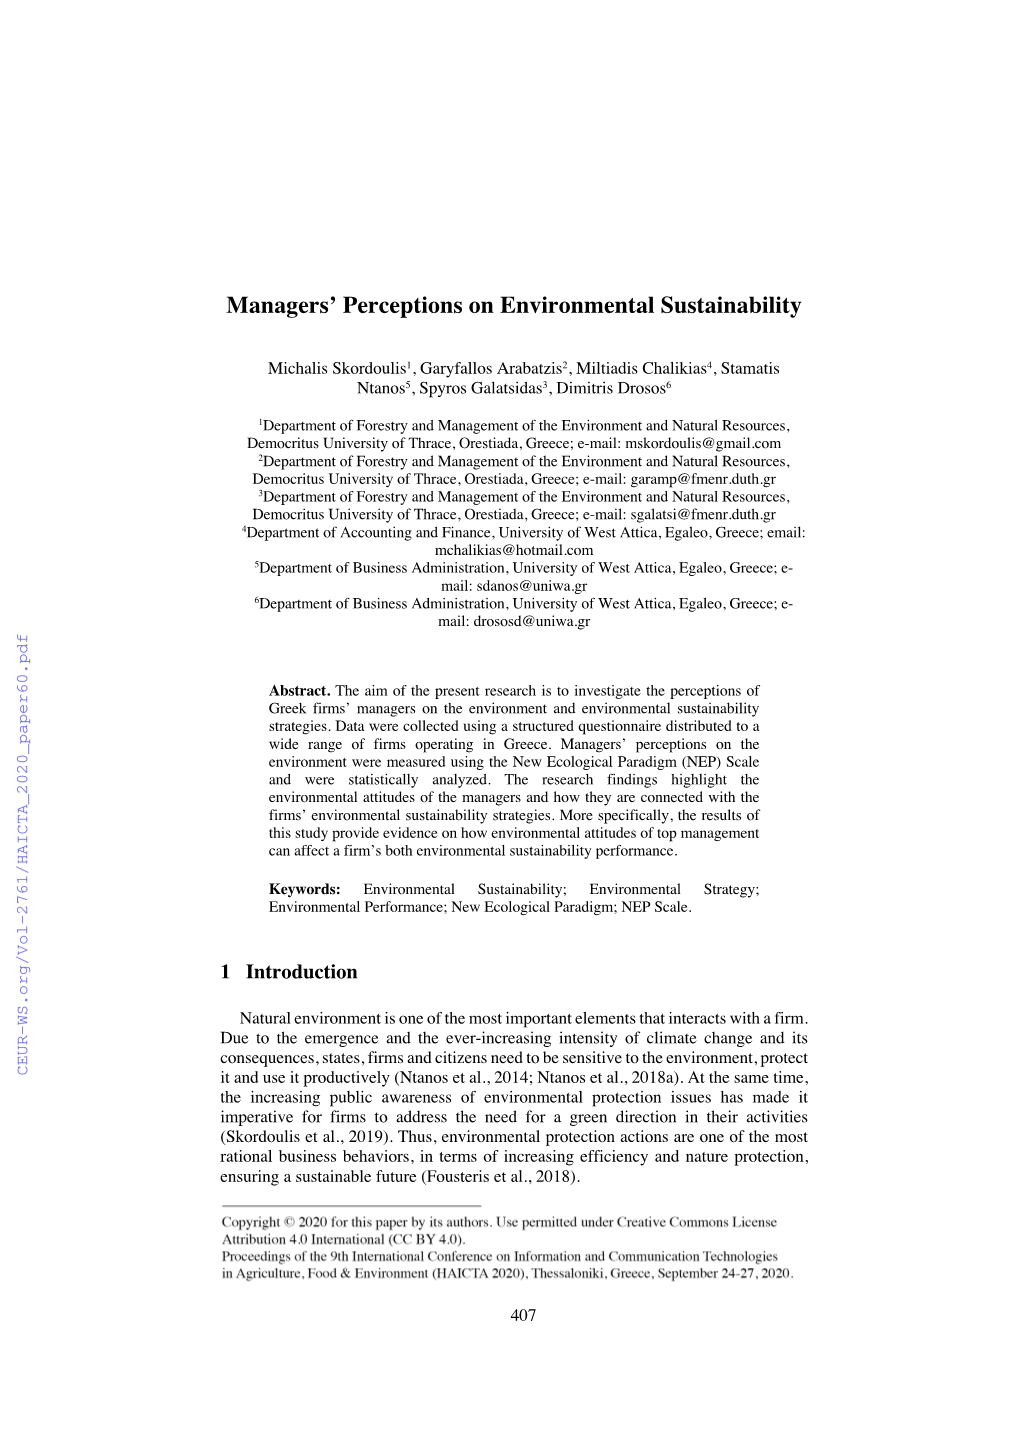 Managers' Perceptions on Environmental Sustainability